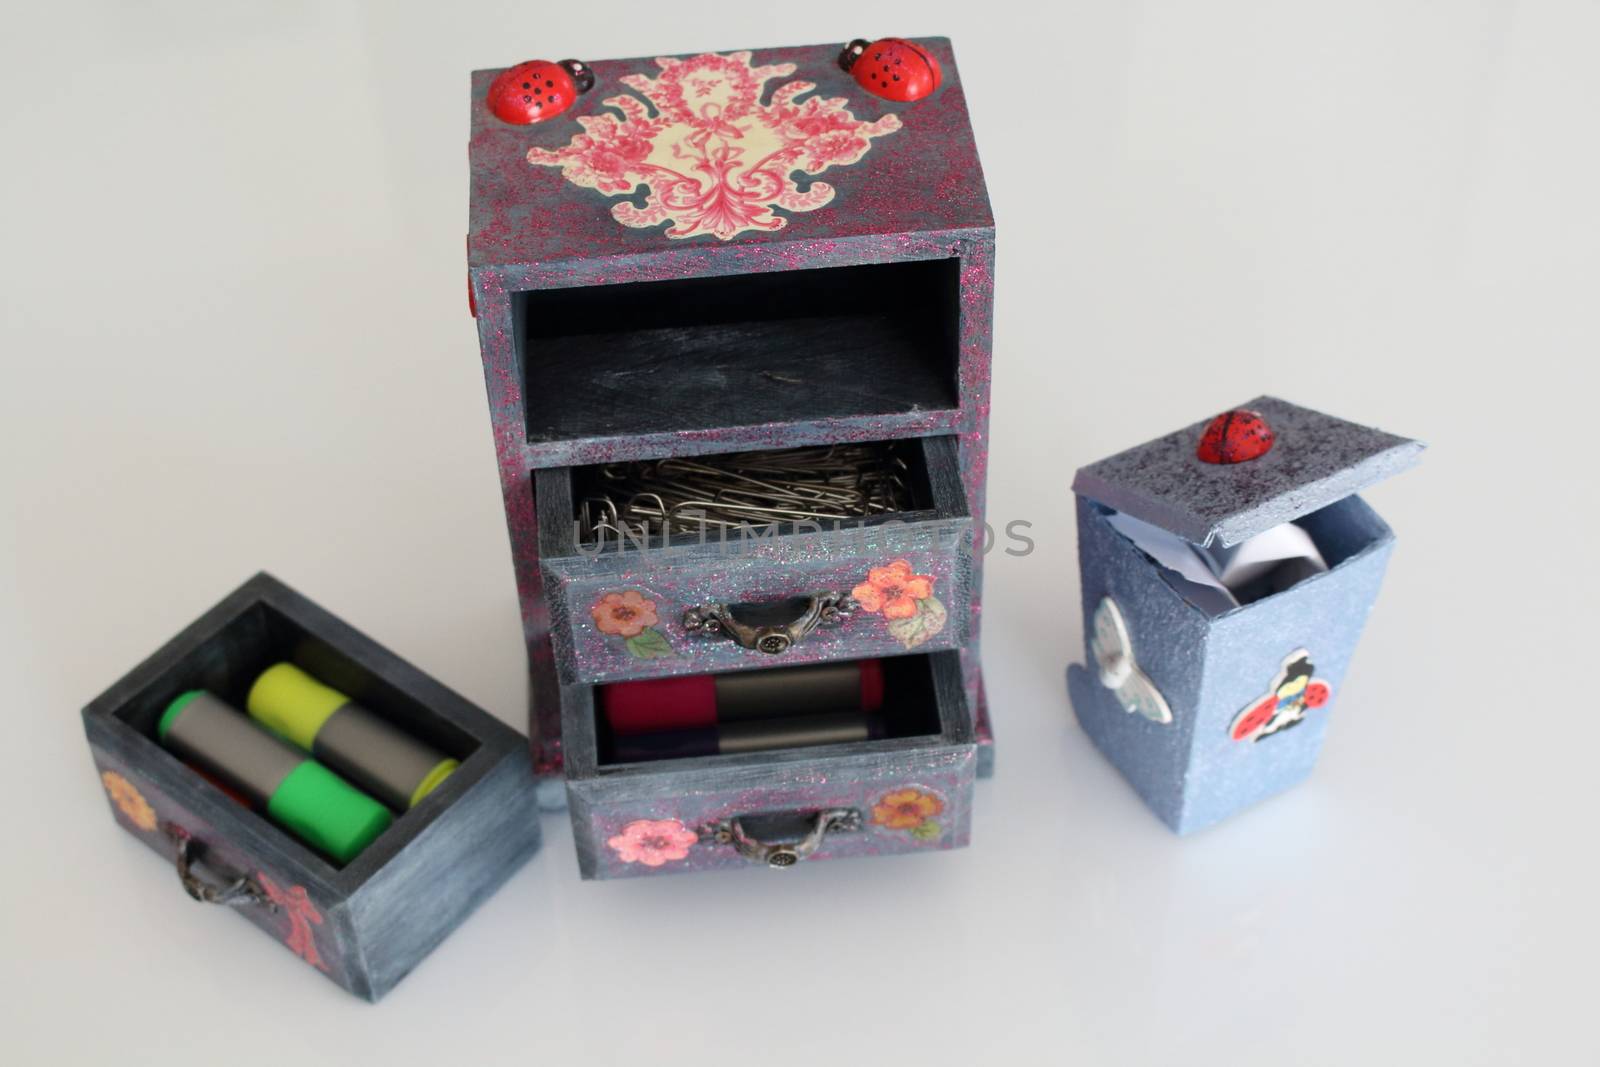 A handmade mini chest of three drawers decoupaged with floral vintage paper, handmade objects decorated using different techniques of decoupage